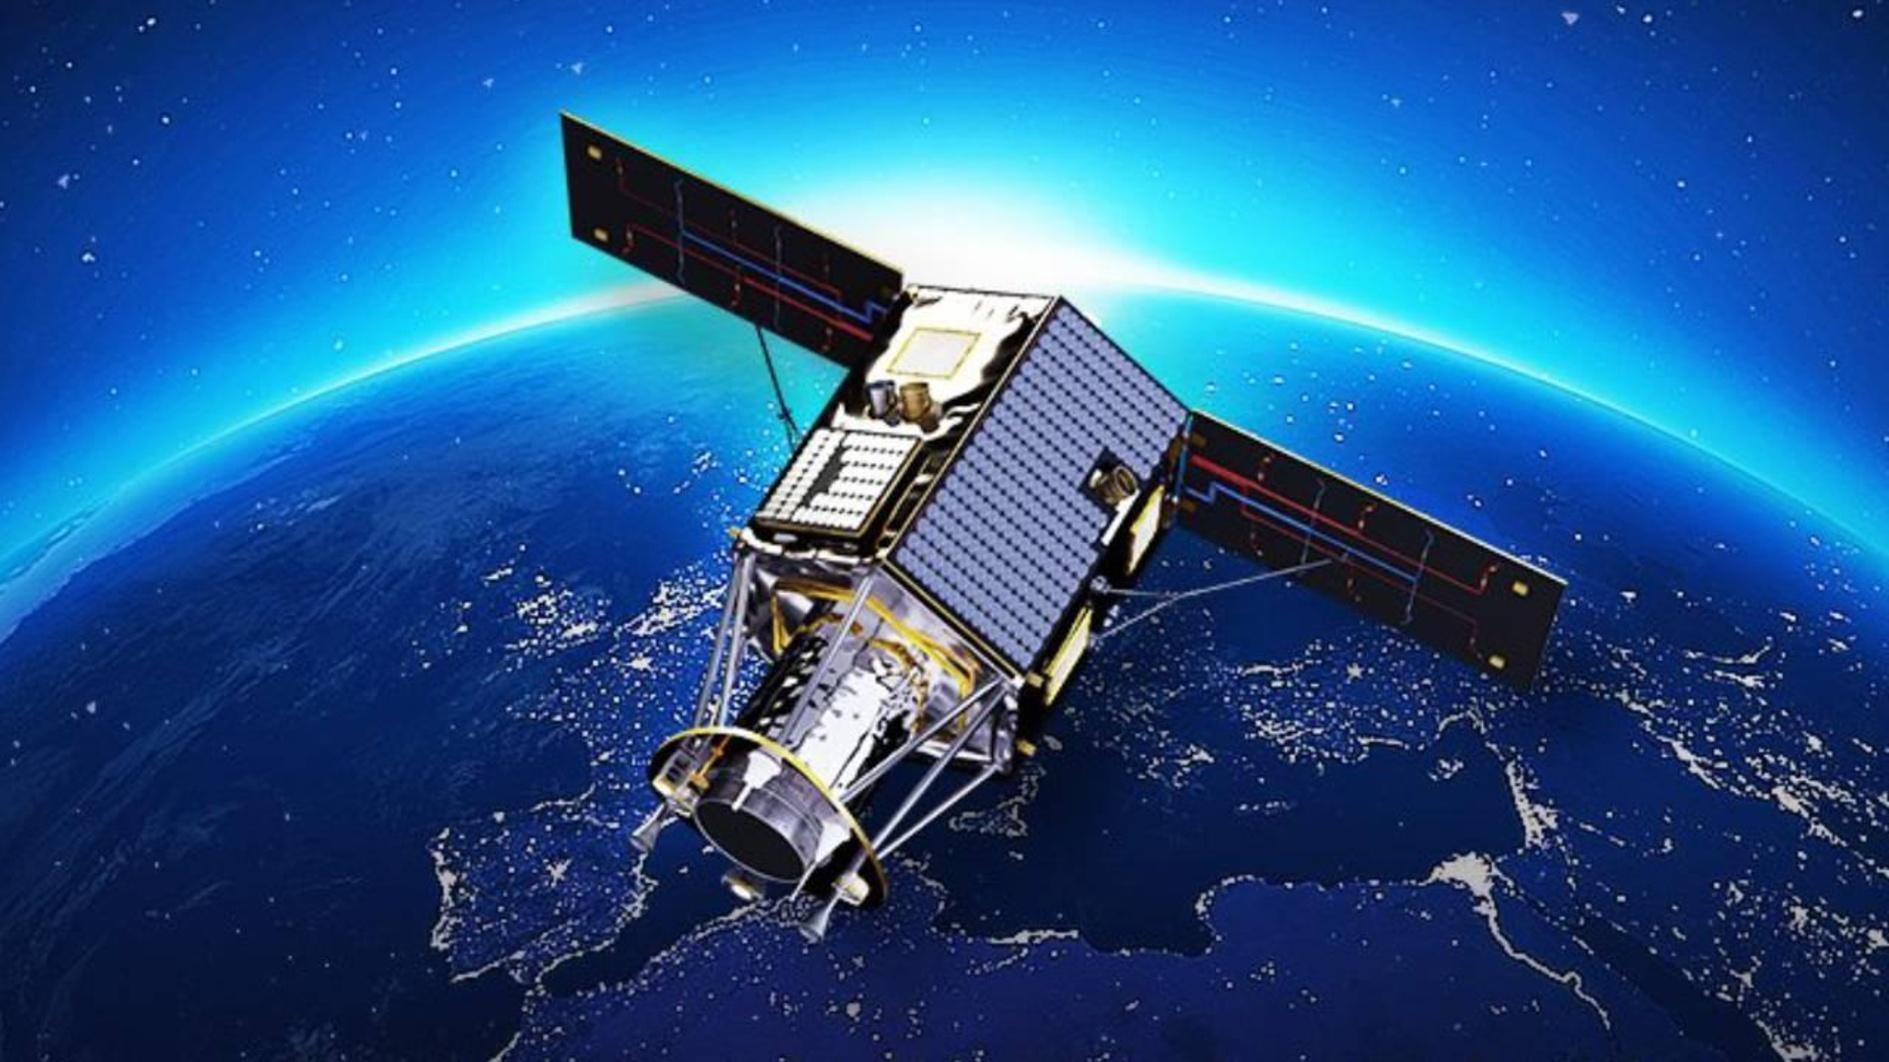 Domestic observation satellite completes first year in space